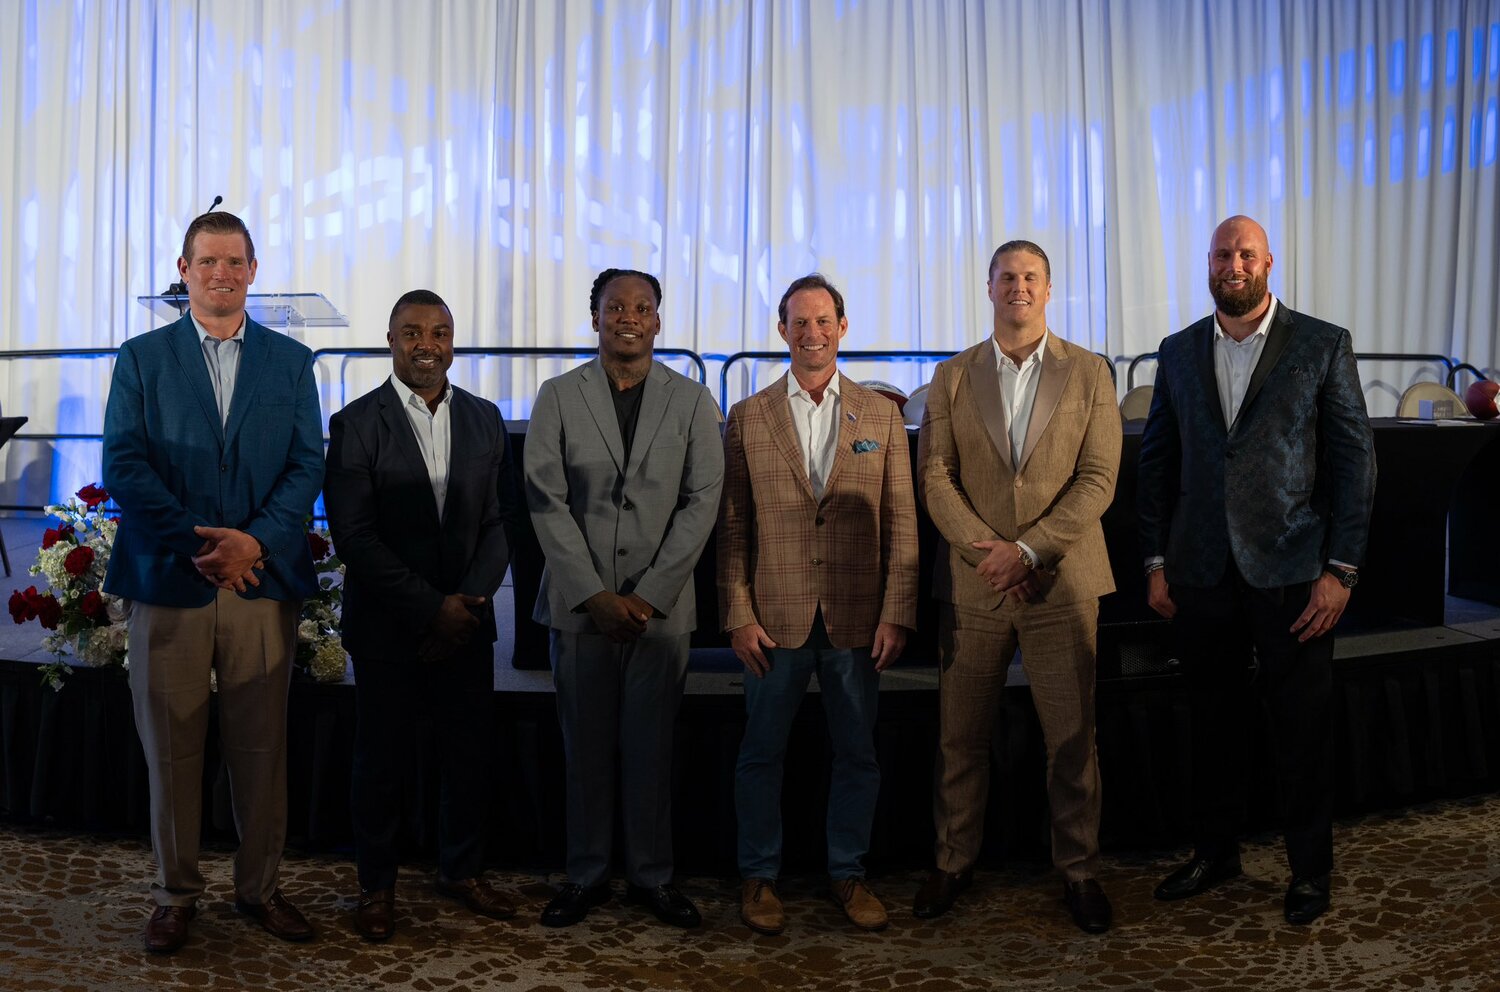 The Senior Bowl welcomed its newest Hall of Fame class on Sunday, June 25, at The Grand Hotel Golf Club & Spa in Point Clear. Pictured from the left are Marshal Yanda, Brian Westbrook, Chris Johnson, Senior Bowl Executive Director Jim Nagy, Clay Matthews and Lane Johnson.